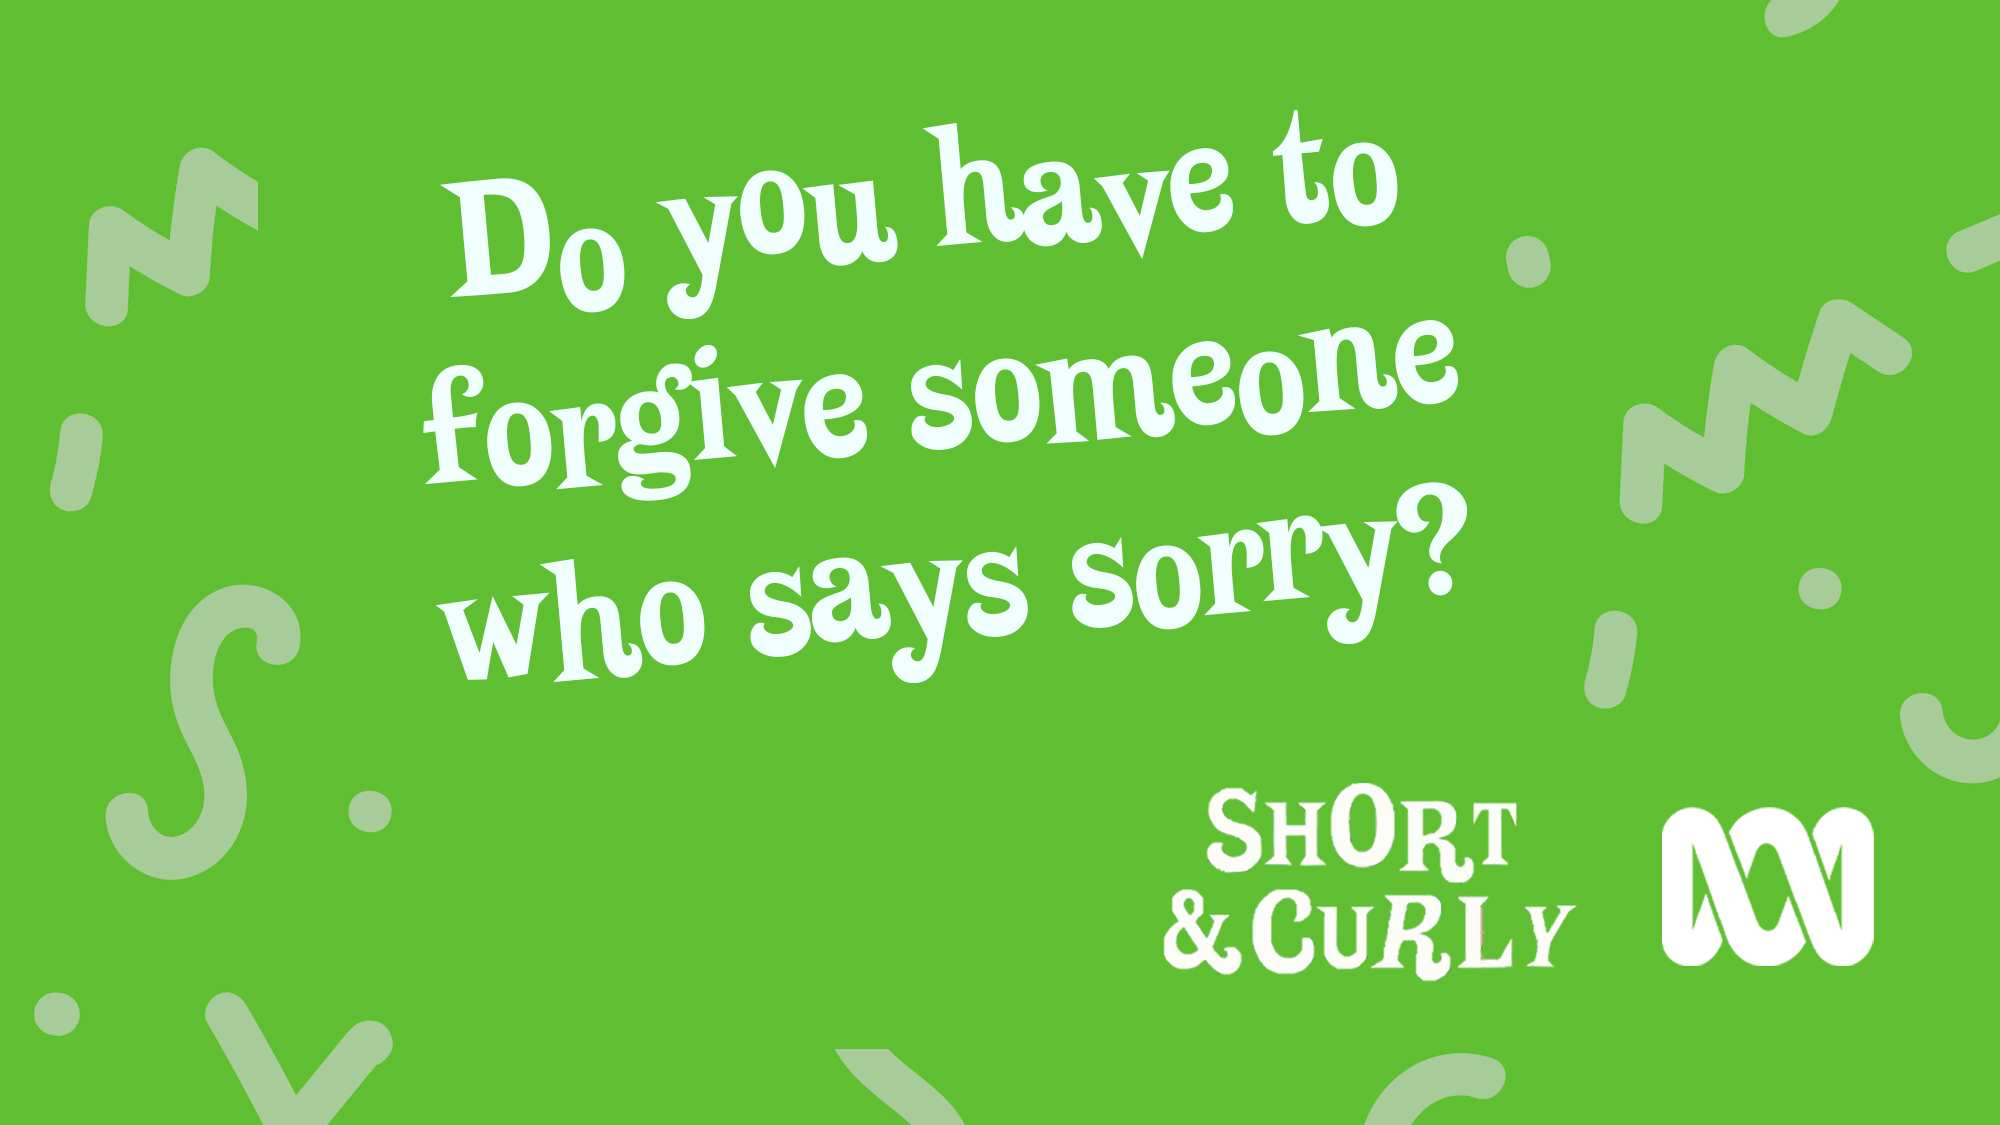 Do you have to forgive someone who says sorry?